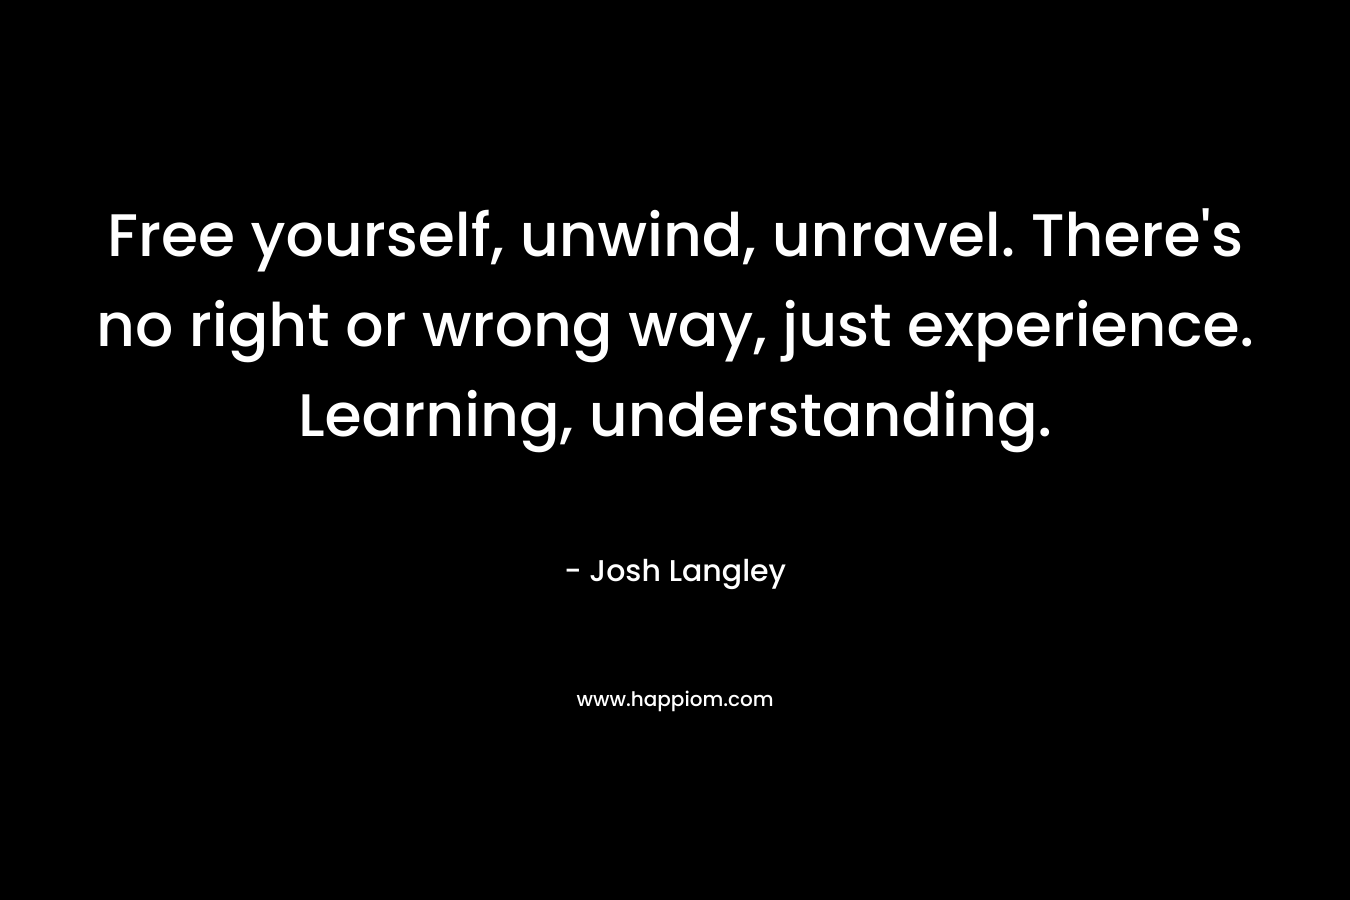 Free yourself, unwind, unravel. There’s no right or wrong way, just experience. Learning, understanding. – Josh Langley